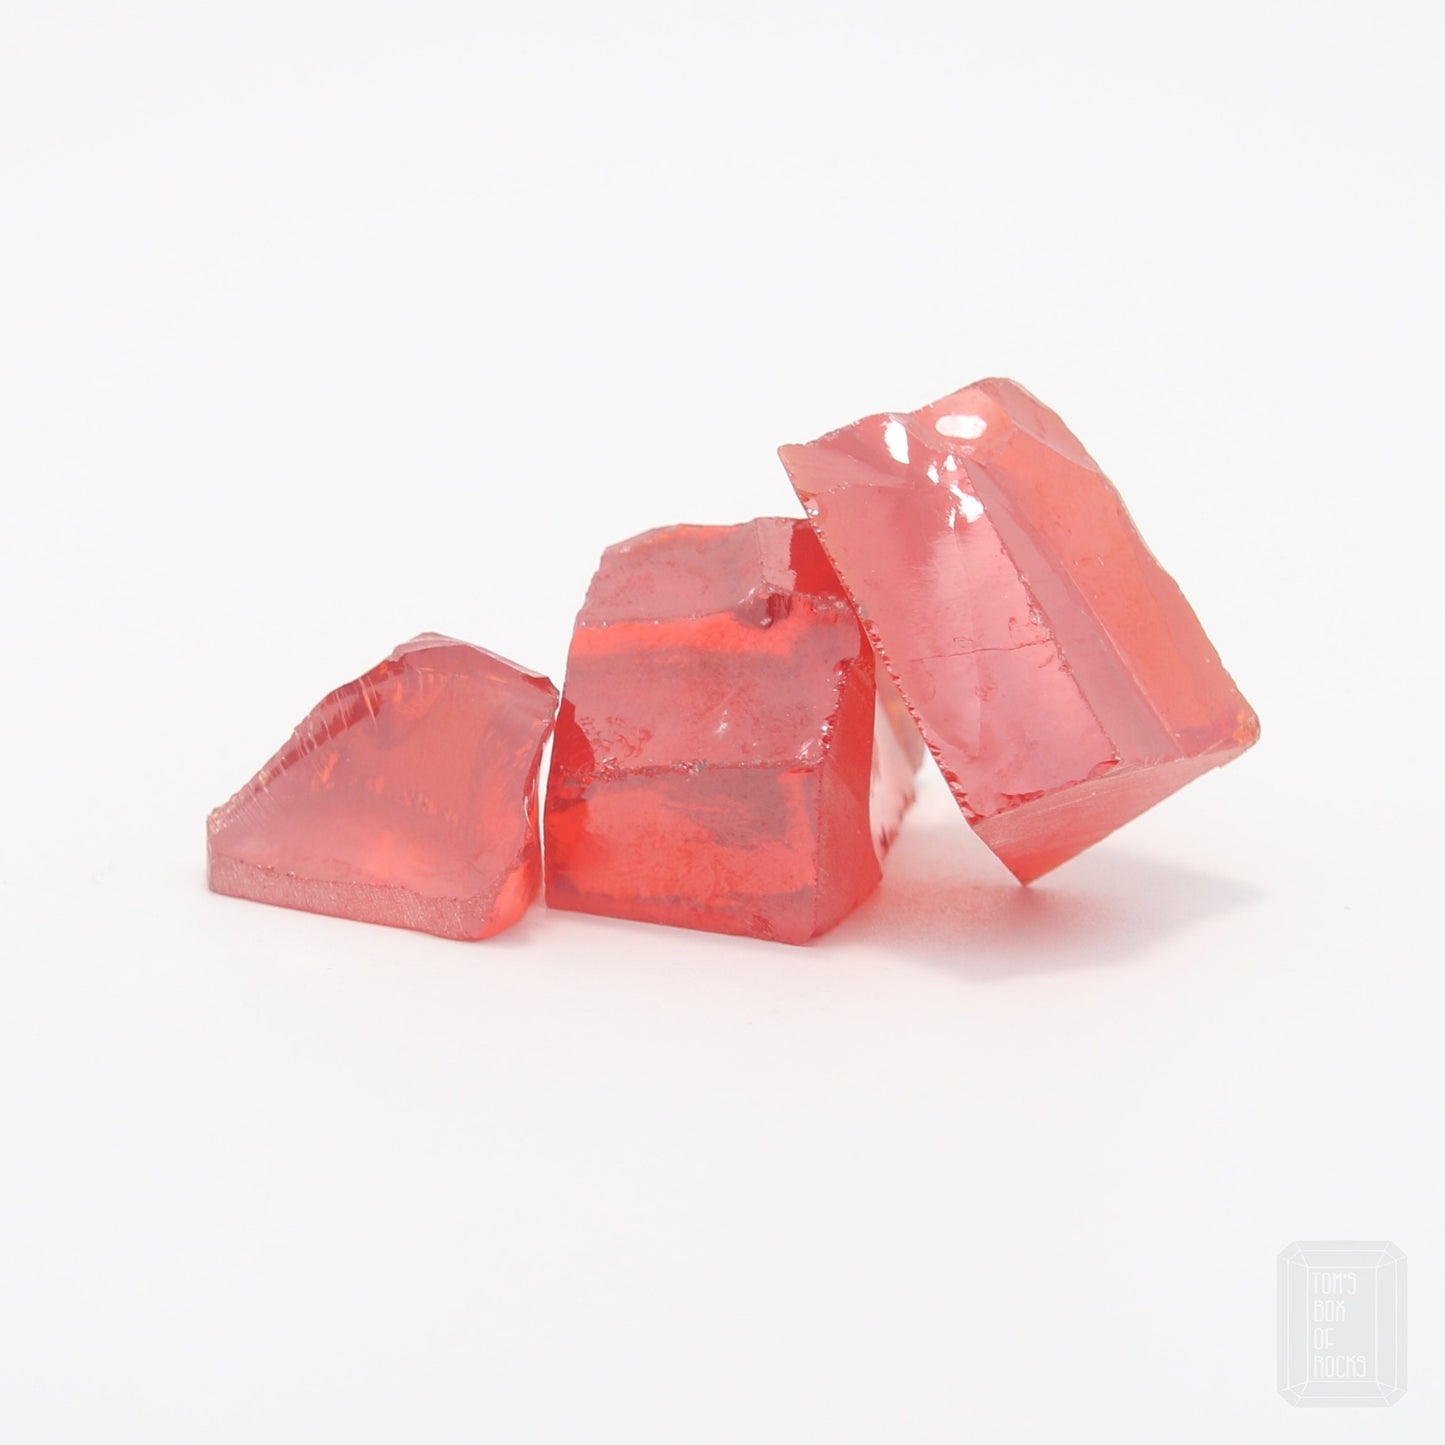 Red Cubic Zirconia Faceting Rough for Gem Cutting - Various Sizes